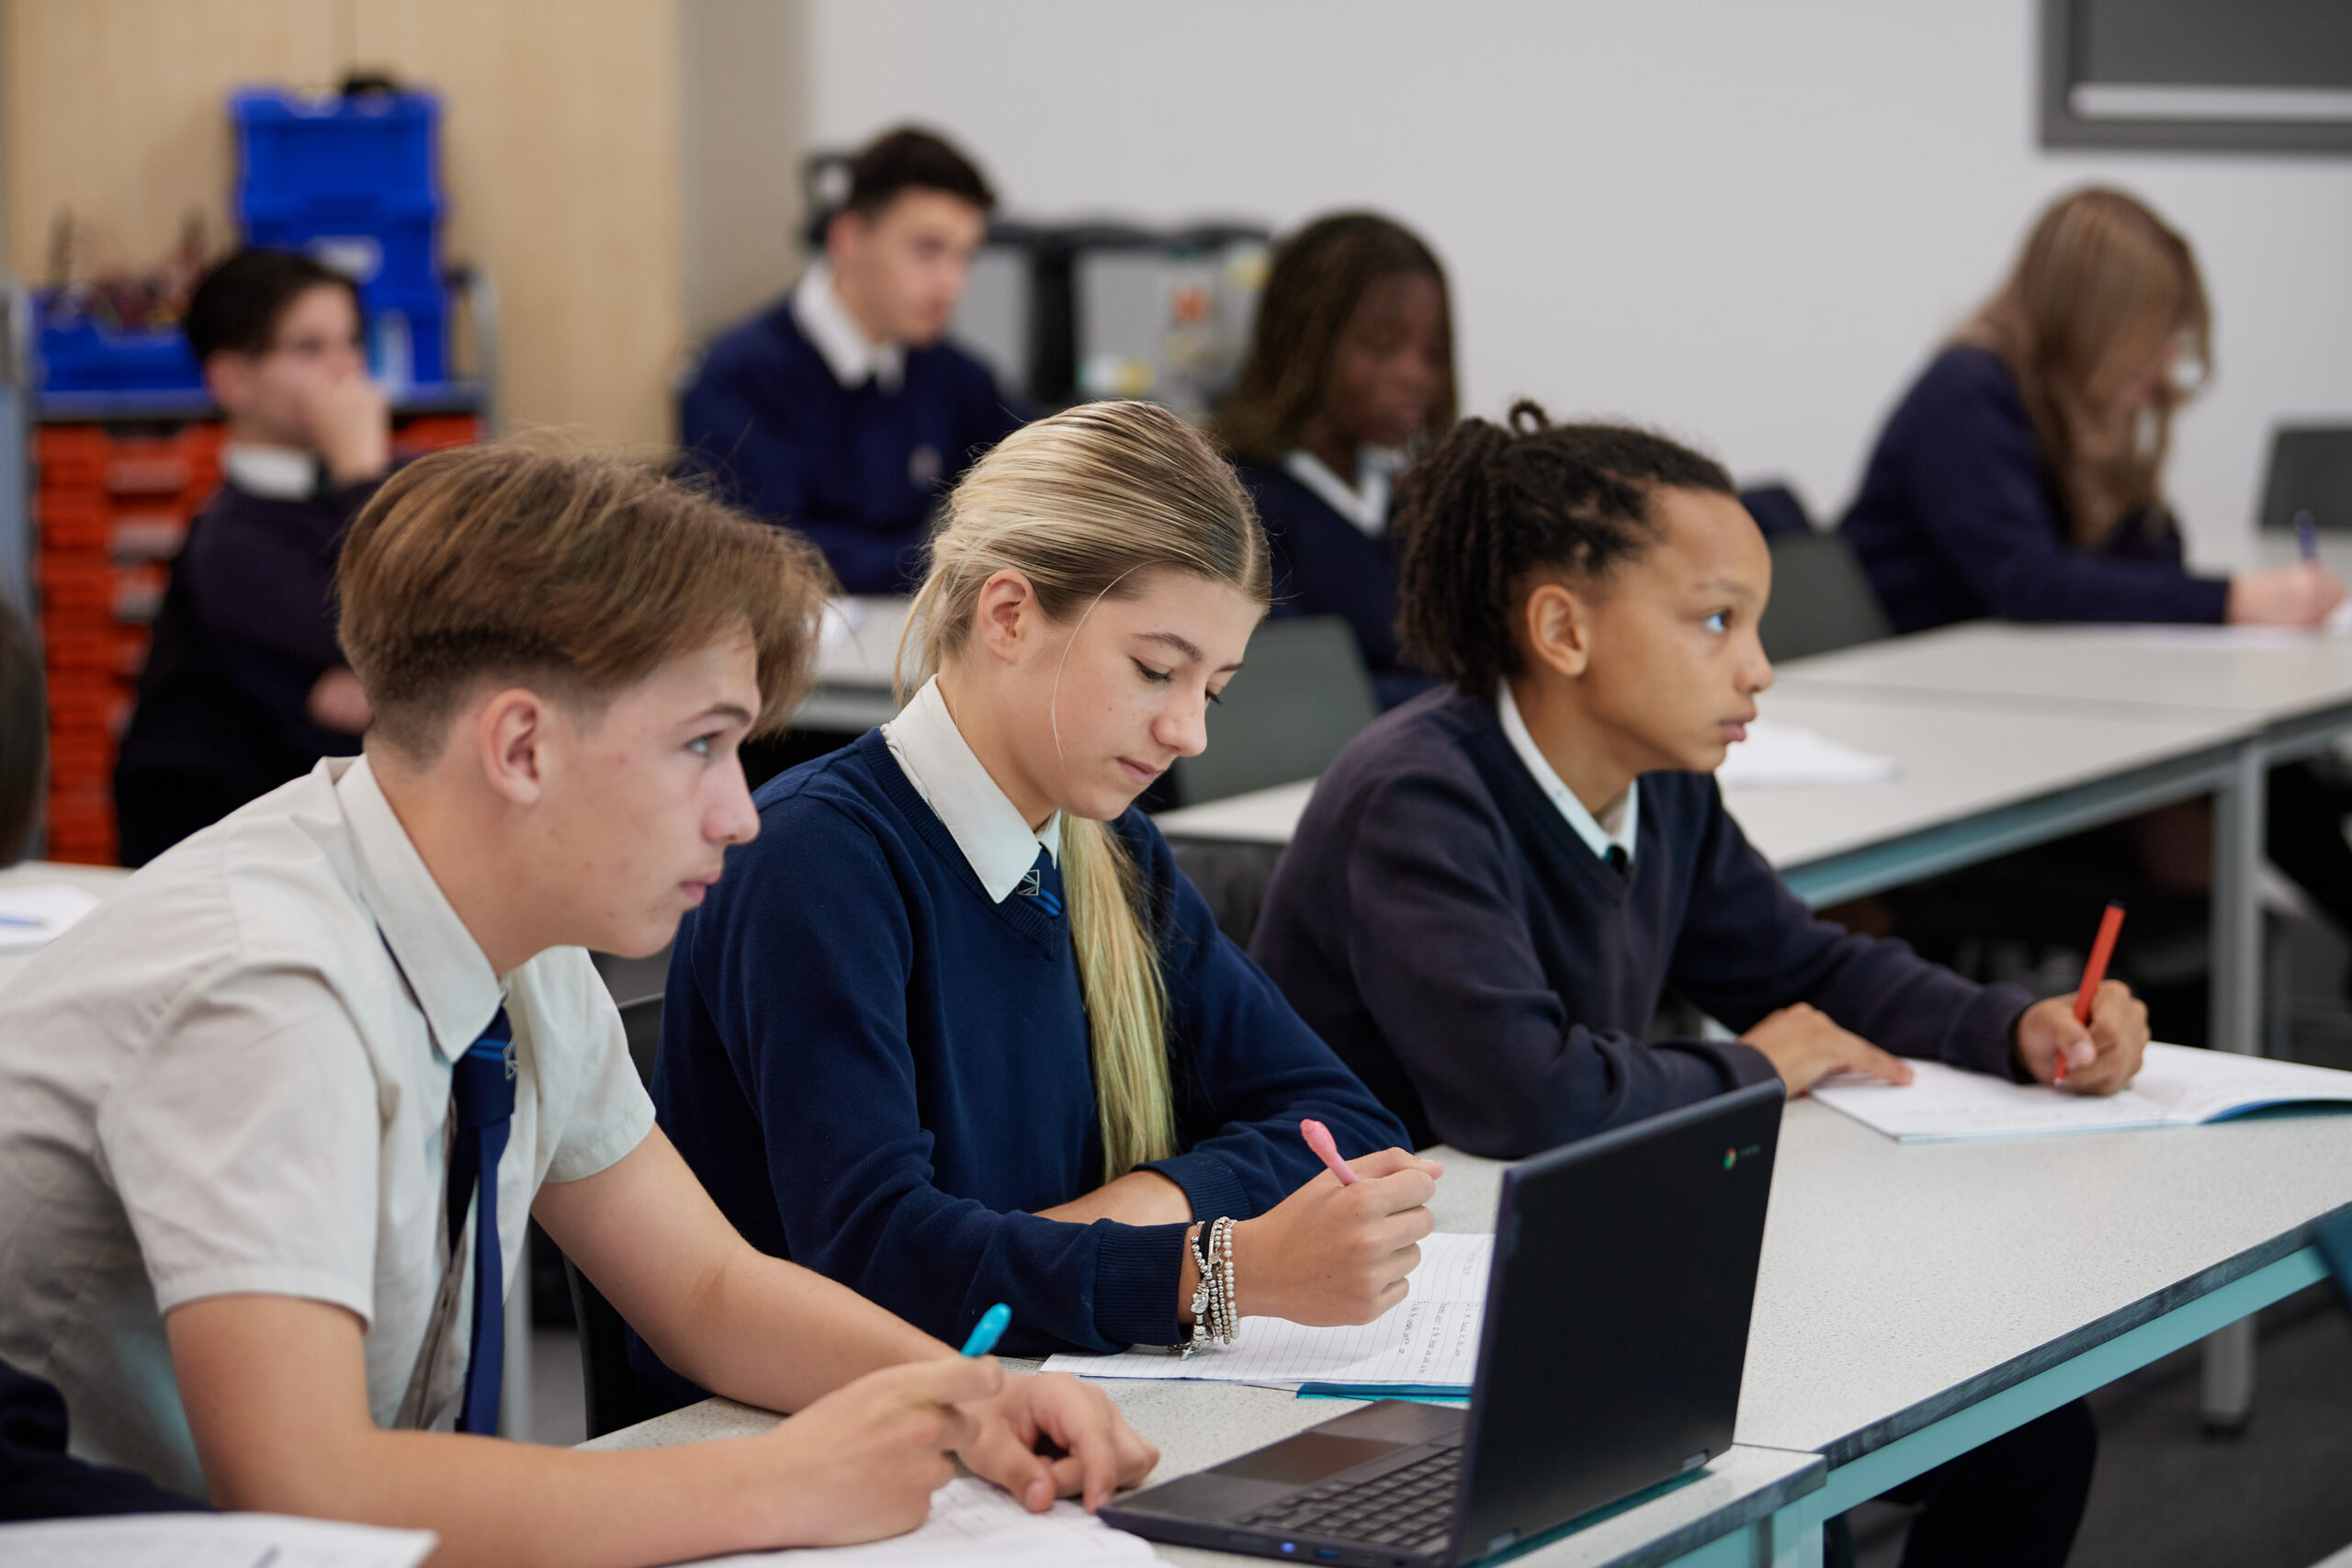 Three Leigh Academy students, one boy and two girls, are pictured working at their desks and looking towards the front of the classroom.